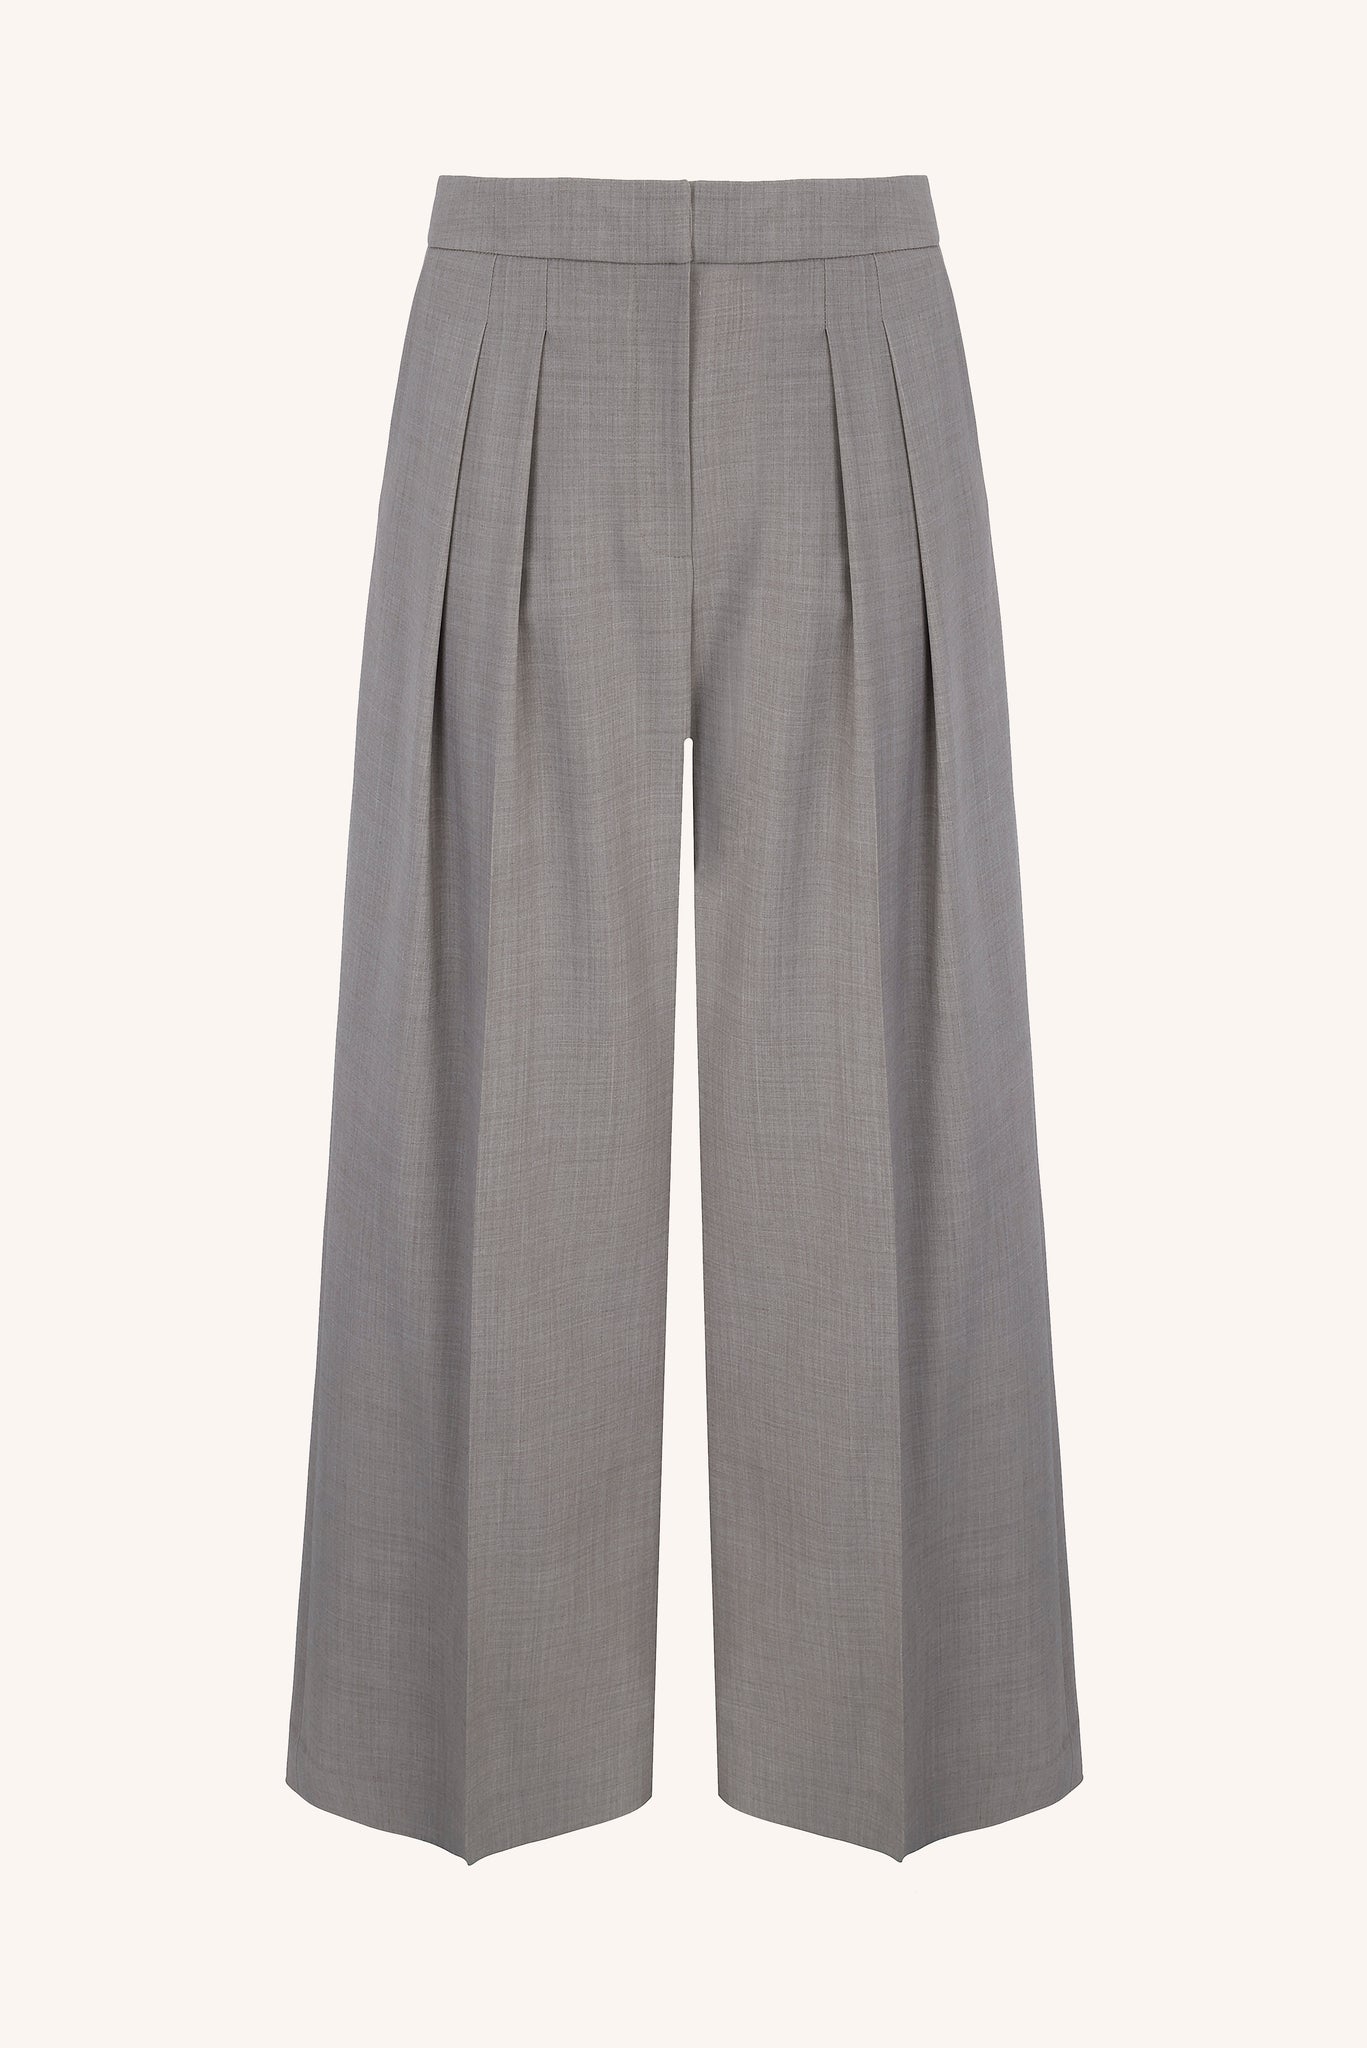 Connie Trousers in Stone Summer Wool | Emilia Wickstead